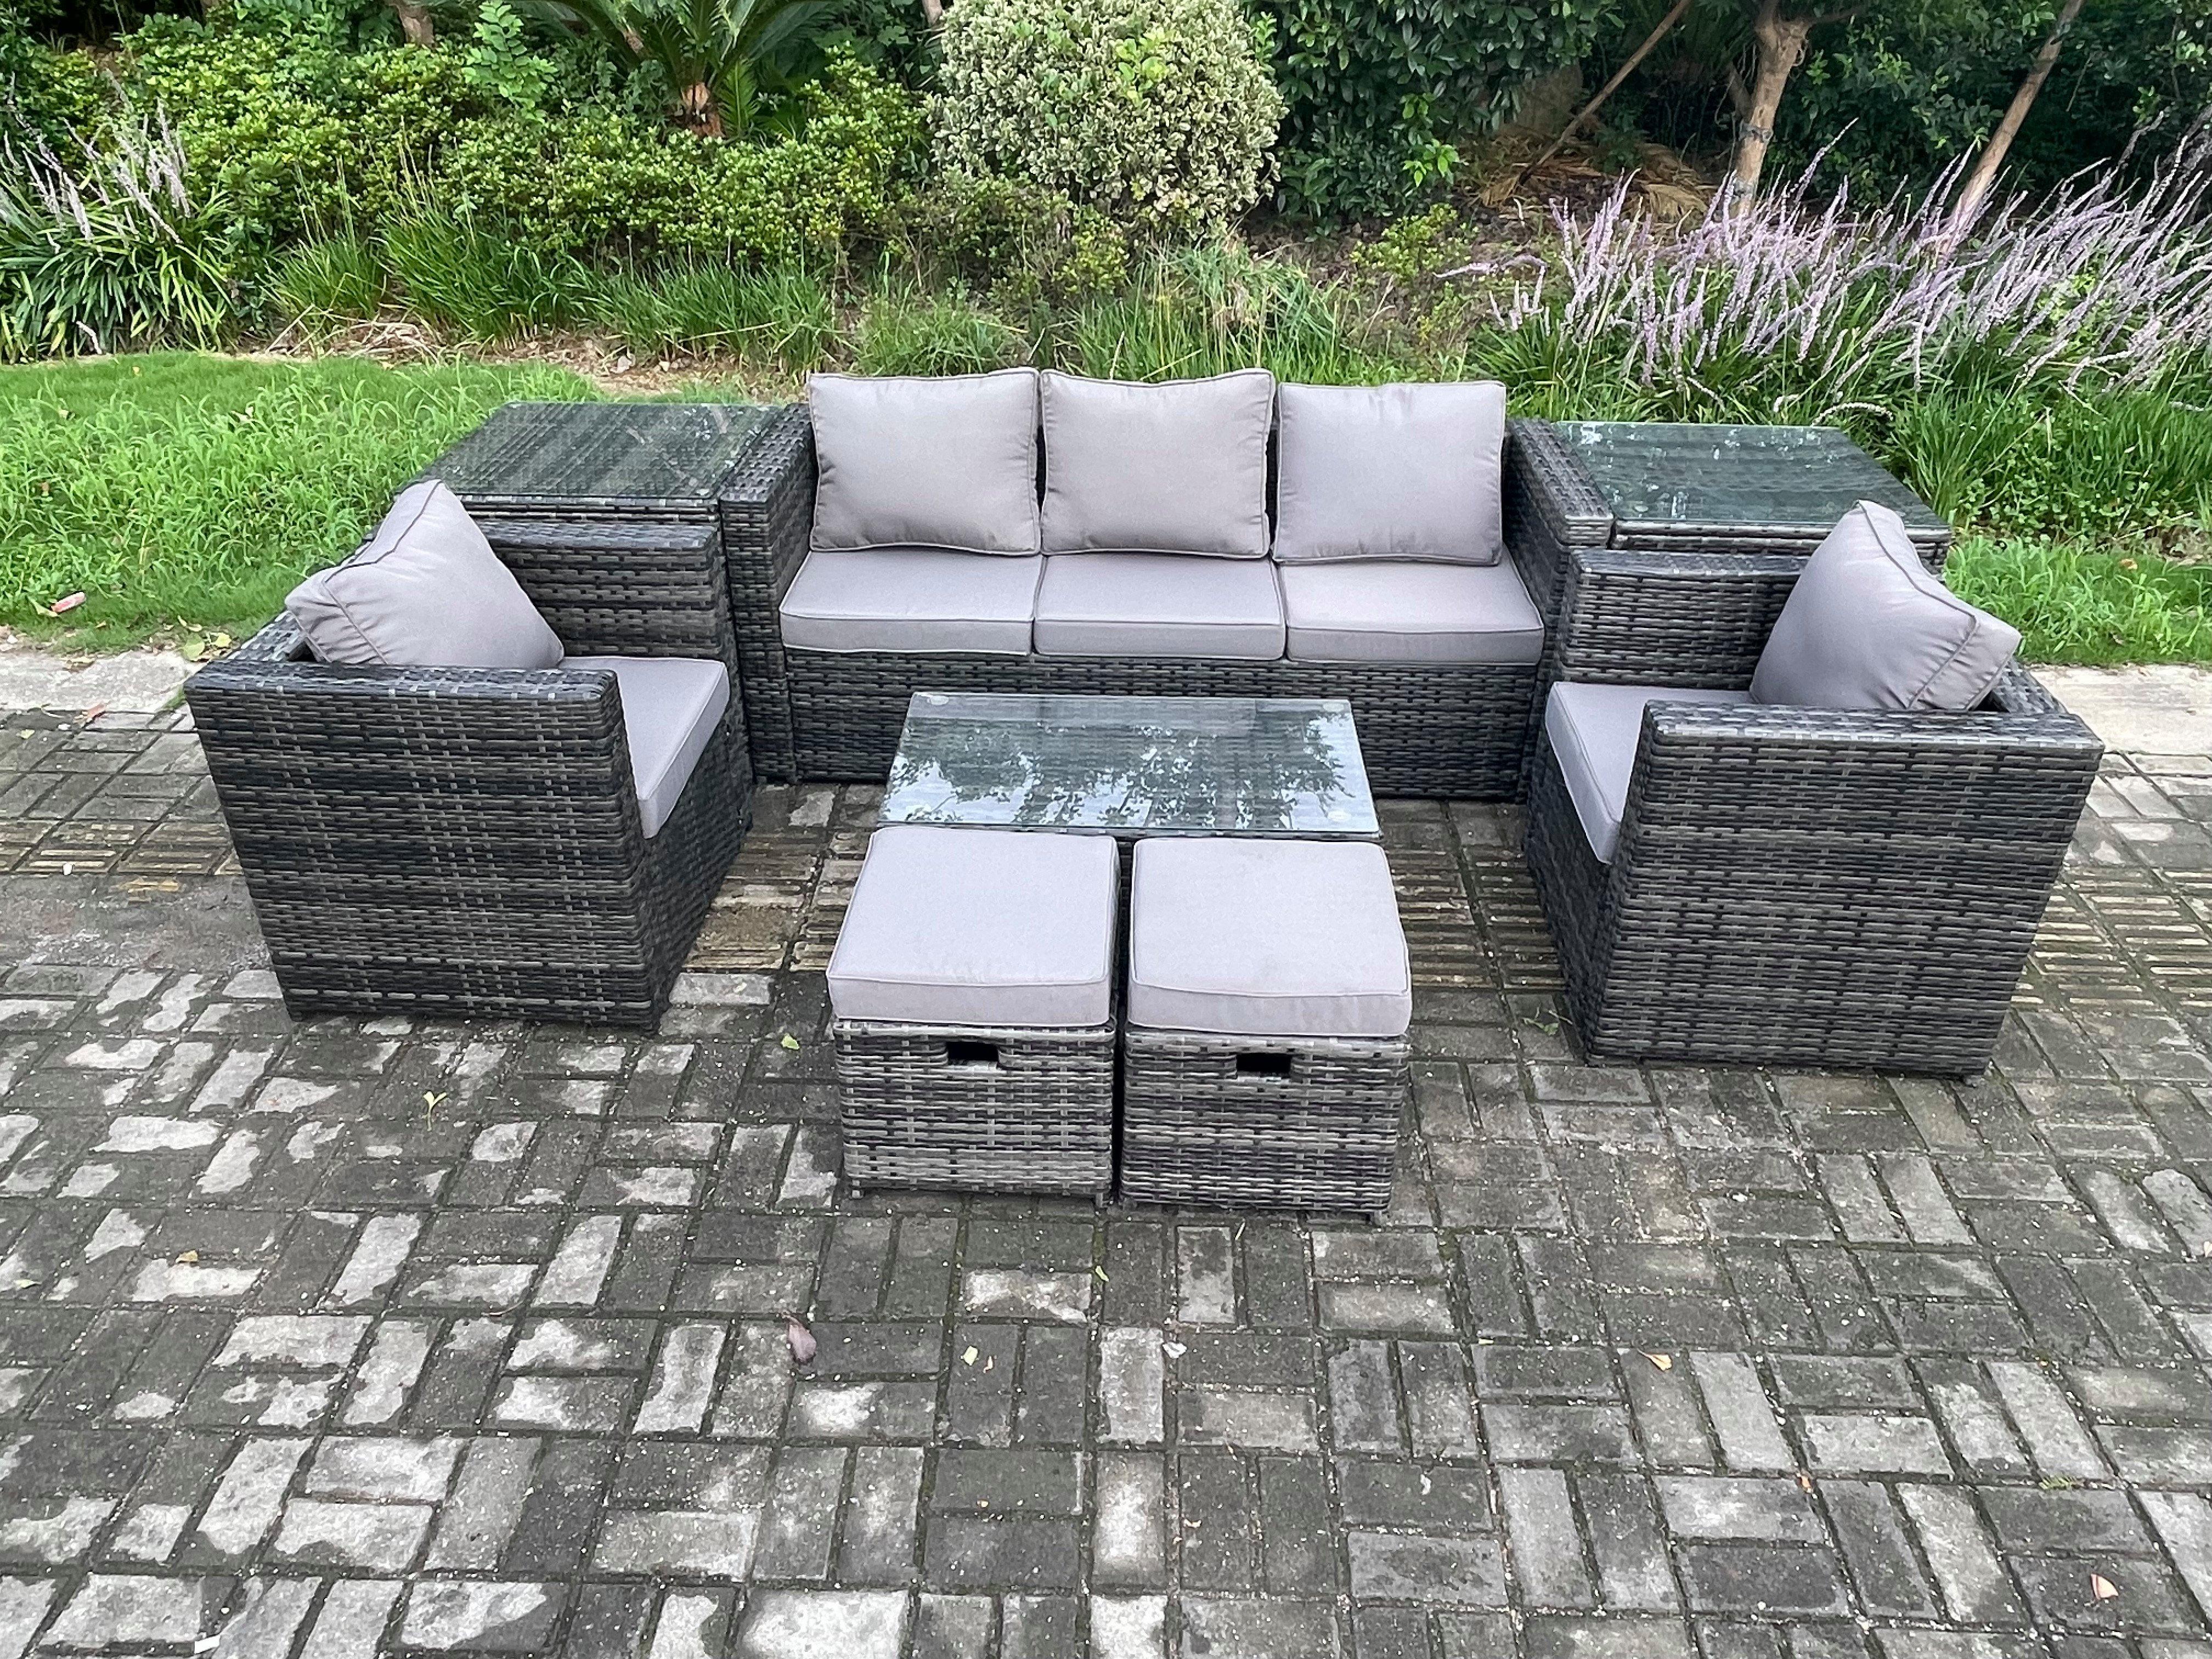 Outdoor Rattan Garden Furniture Set with 3 Seater Sofa Coffee Table 2 Side Tables 2 Armchairs 2 Small Footstool